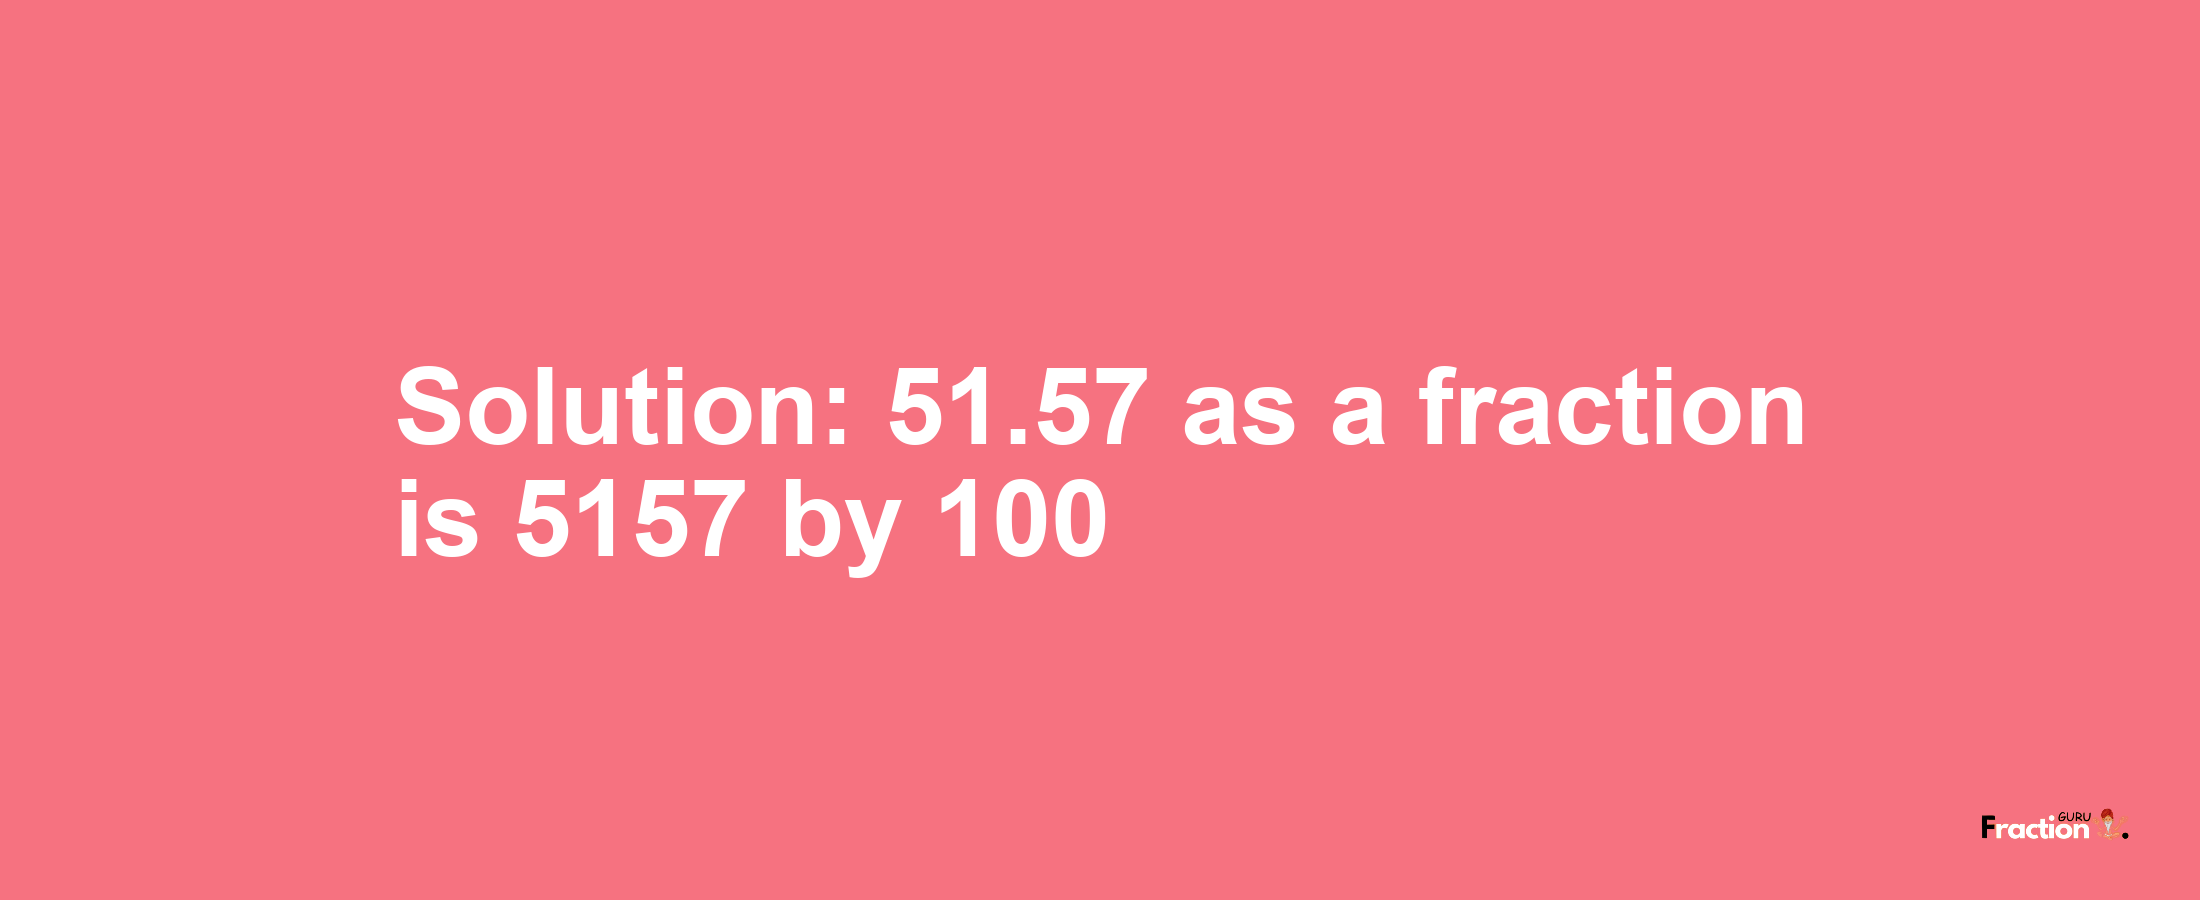 Solution:51.57 as a fraction is 5157/100